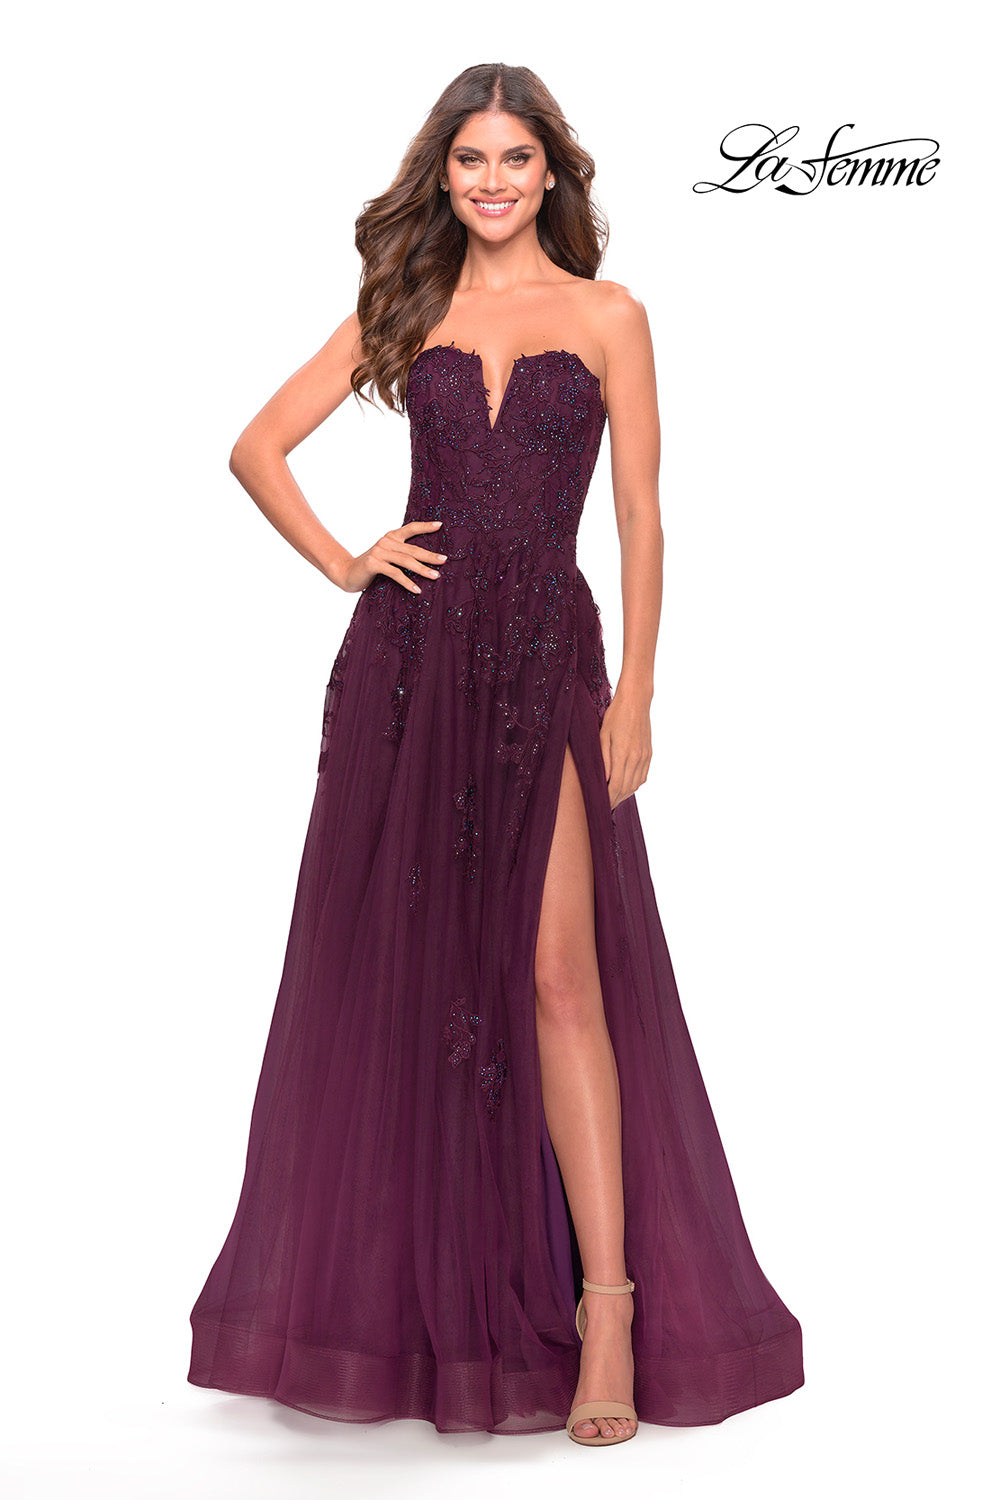 La Femme 31345 prom dress images.  La Femme 31345 is available in these colors: Dark Berry, Dark Emerald.